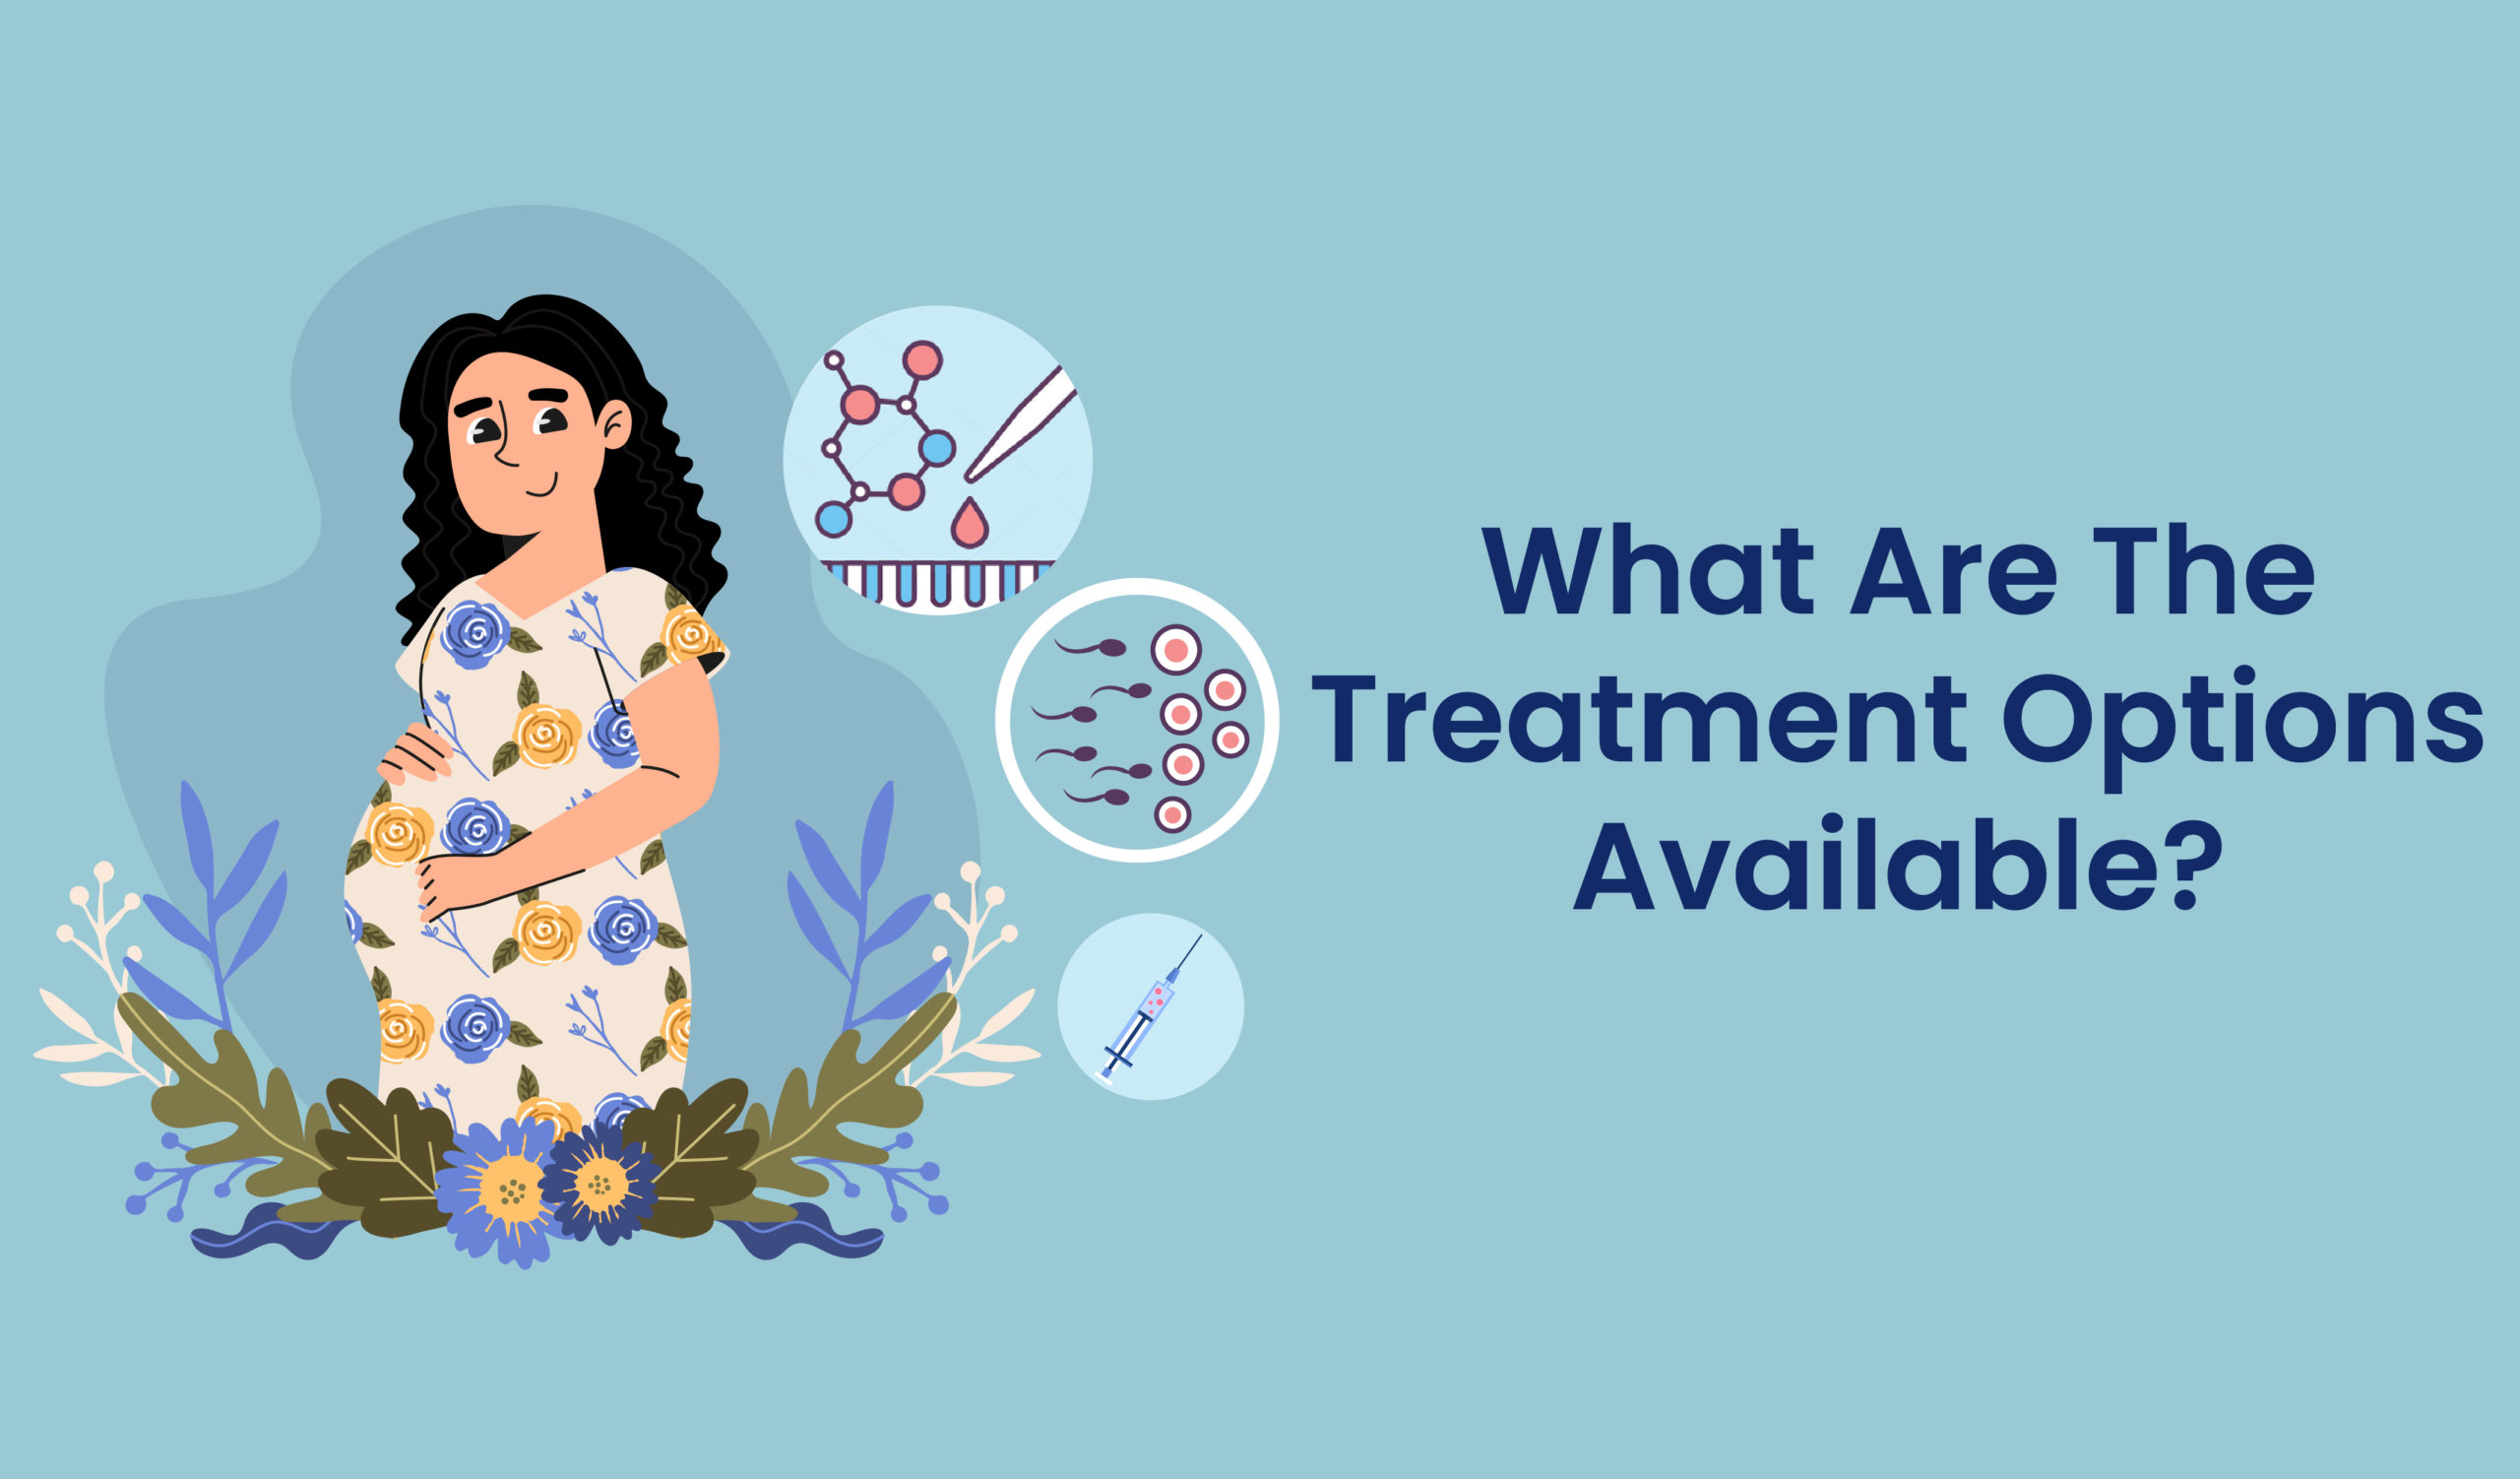 What are the treatment options available